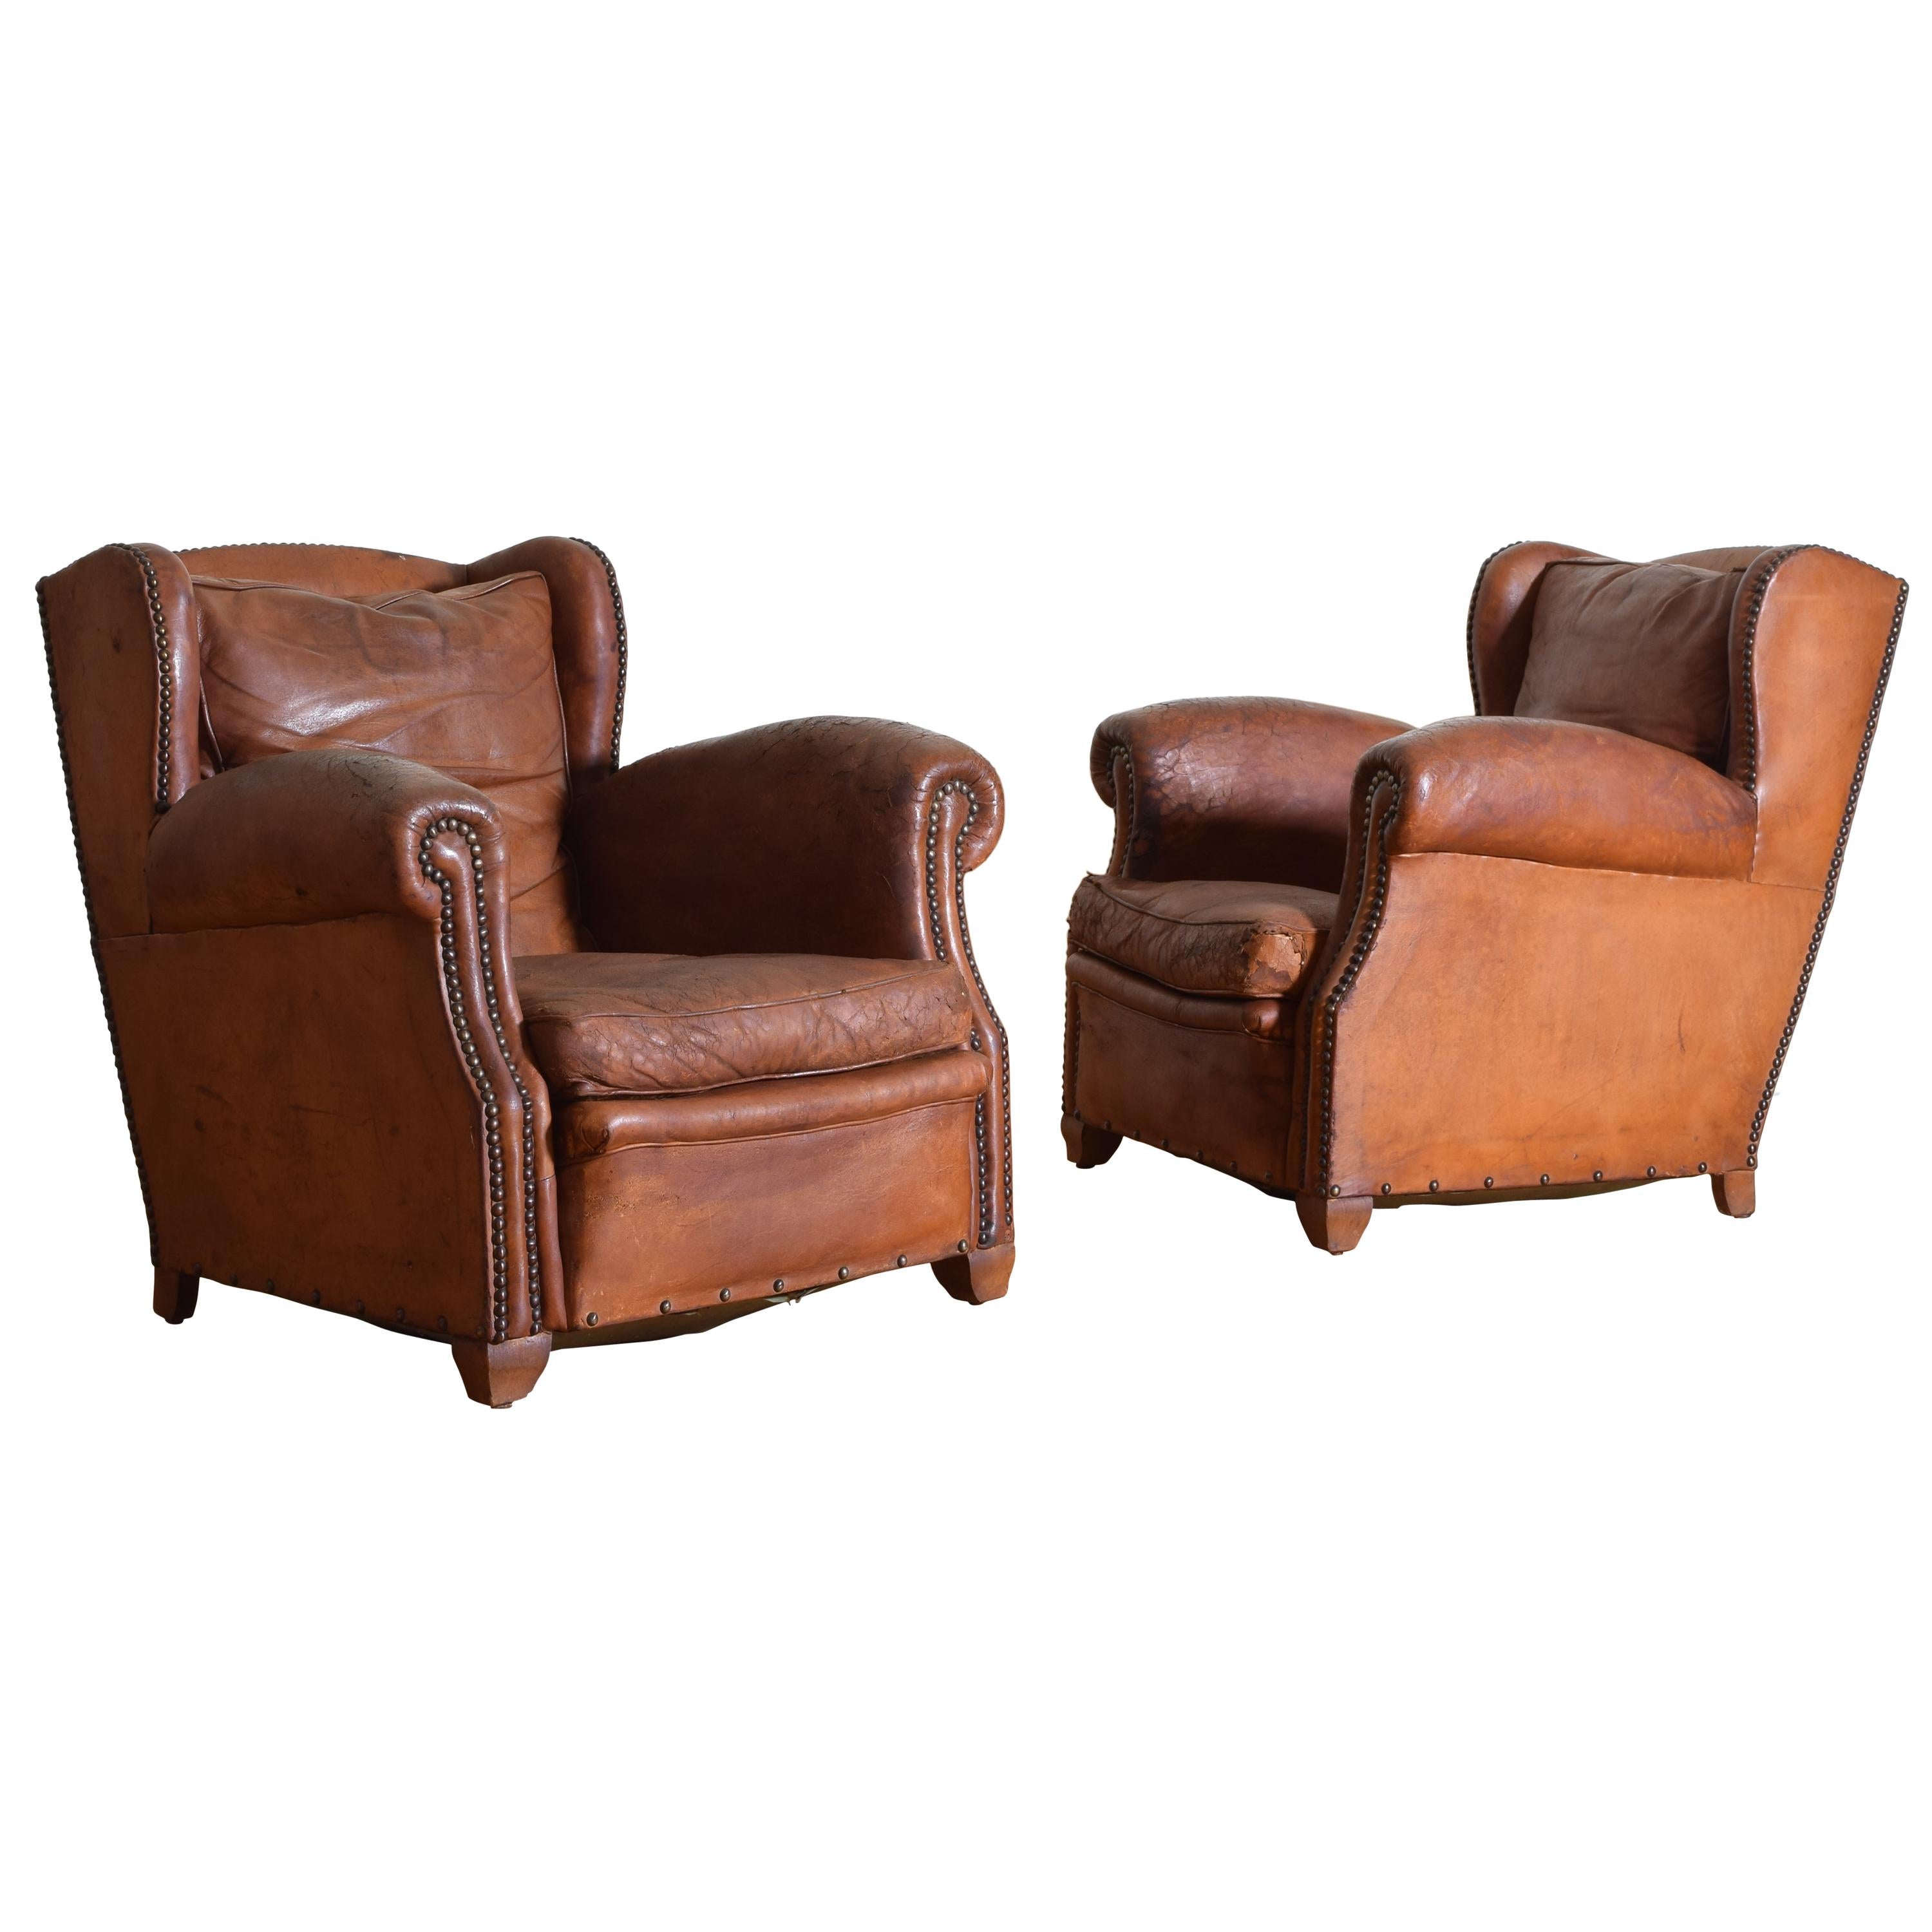 Pair of French Art Deco Leather Upholstered Club Chairs, 20th Century